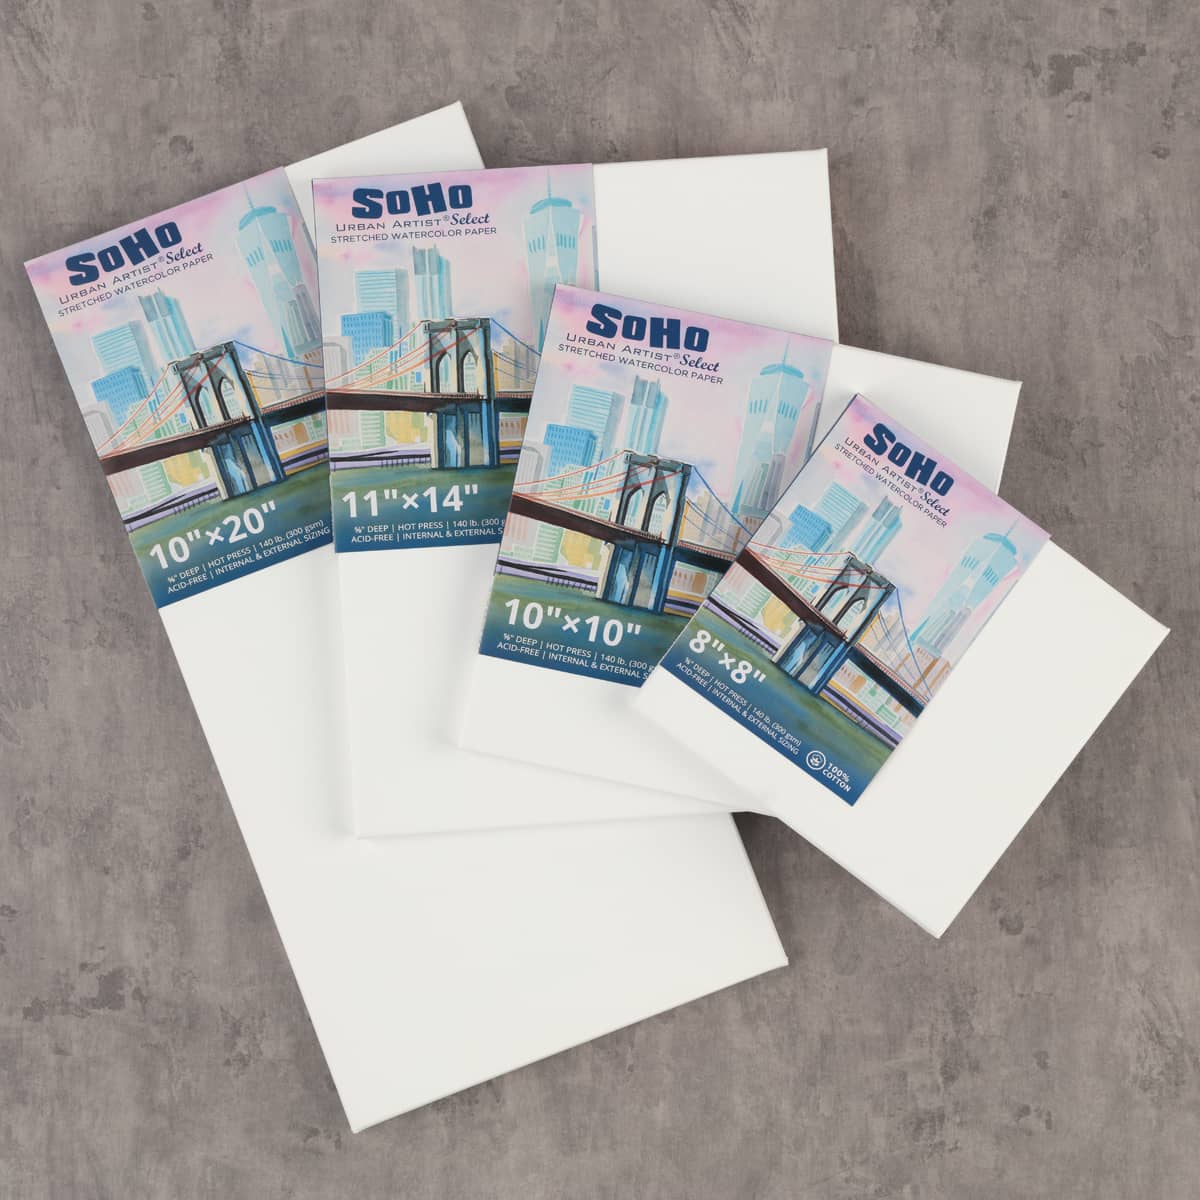 SoHo Select Stretched Cotton Watercolor Paper